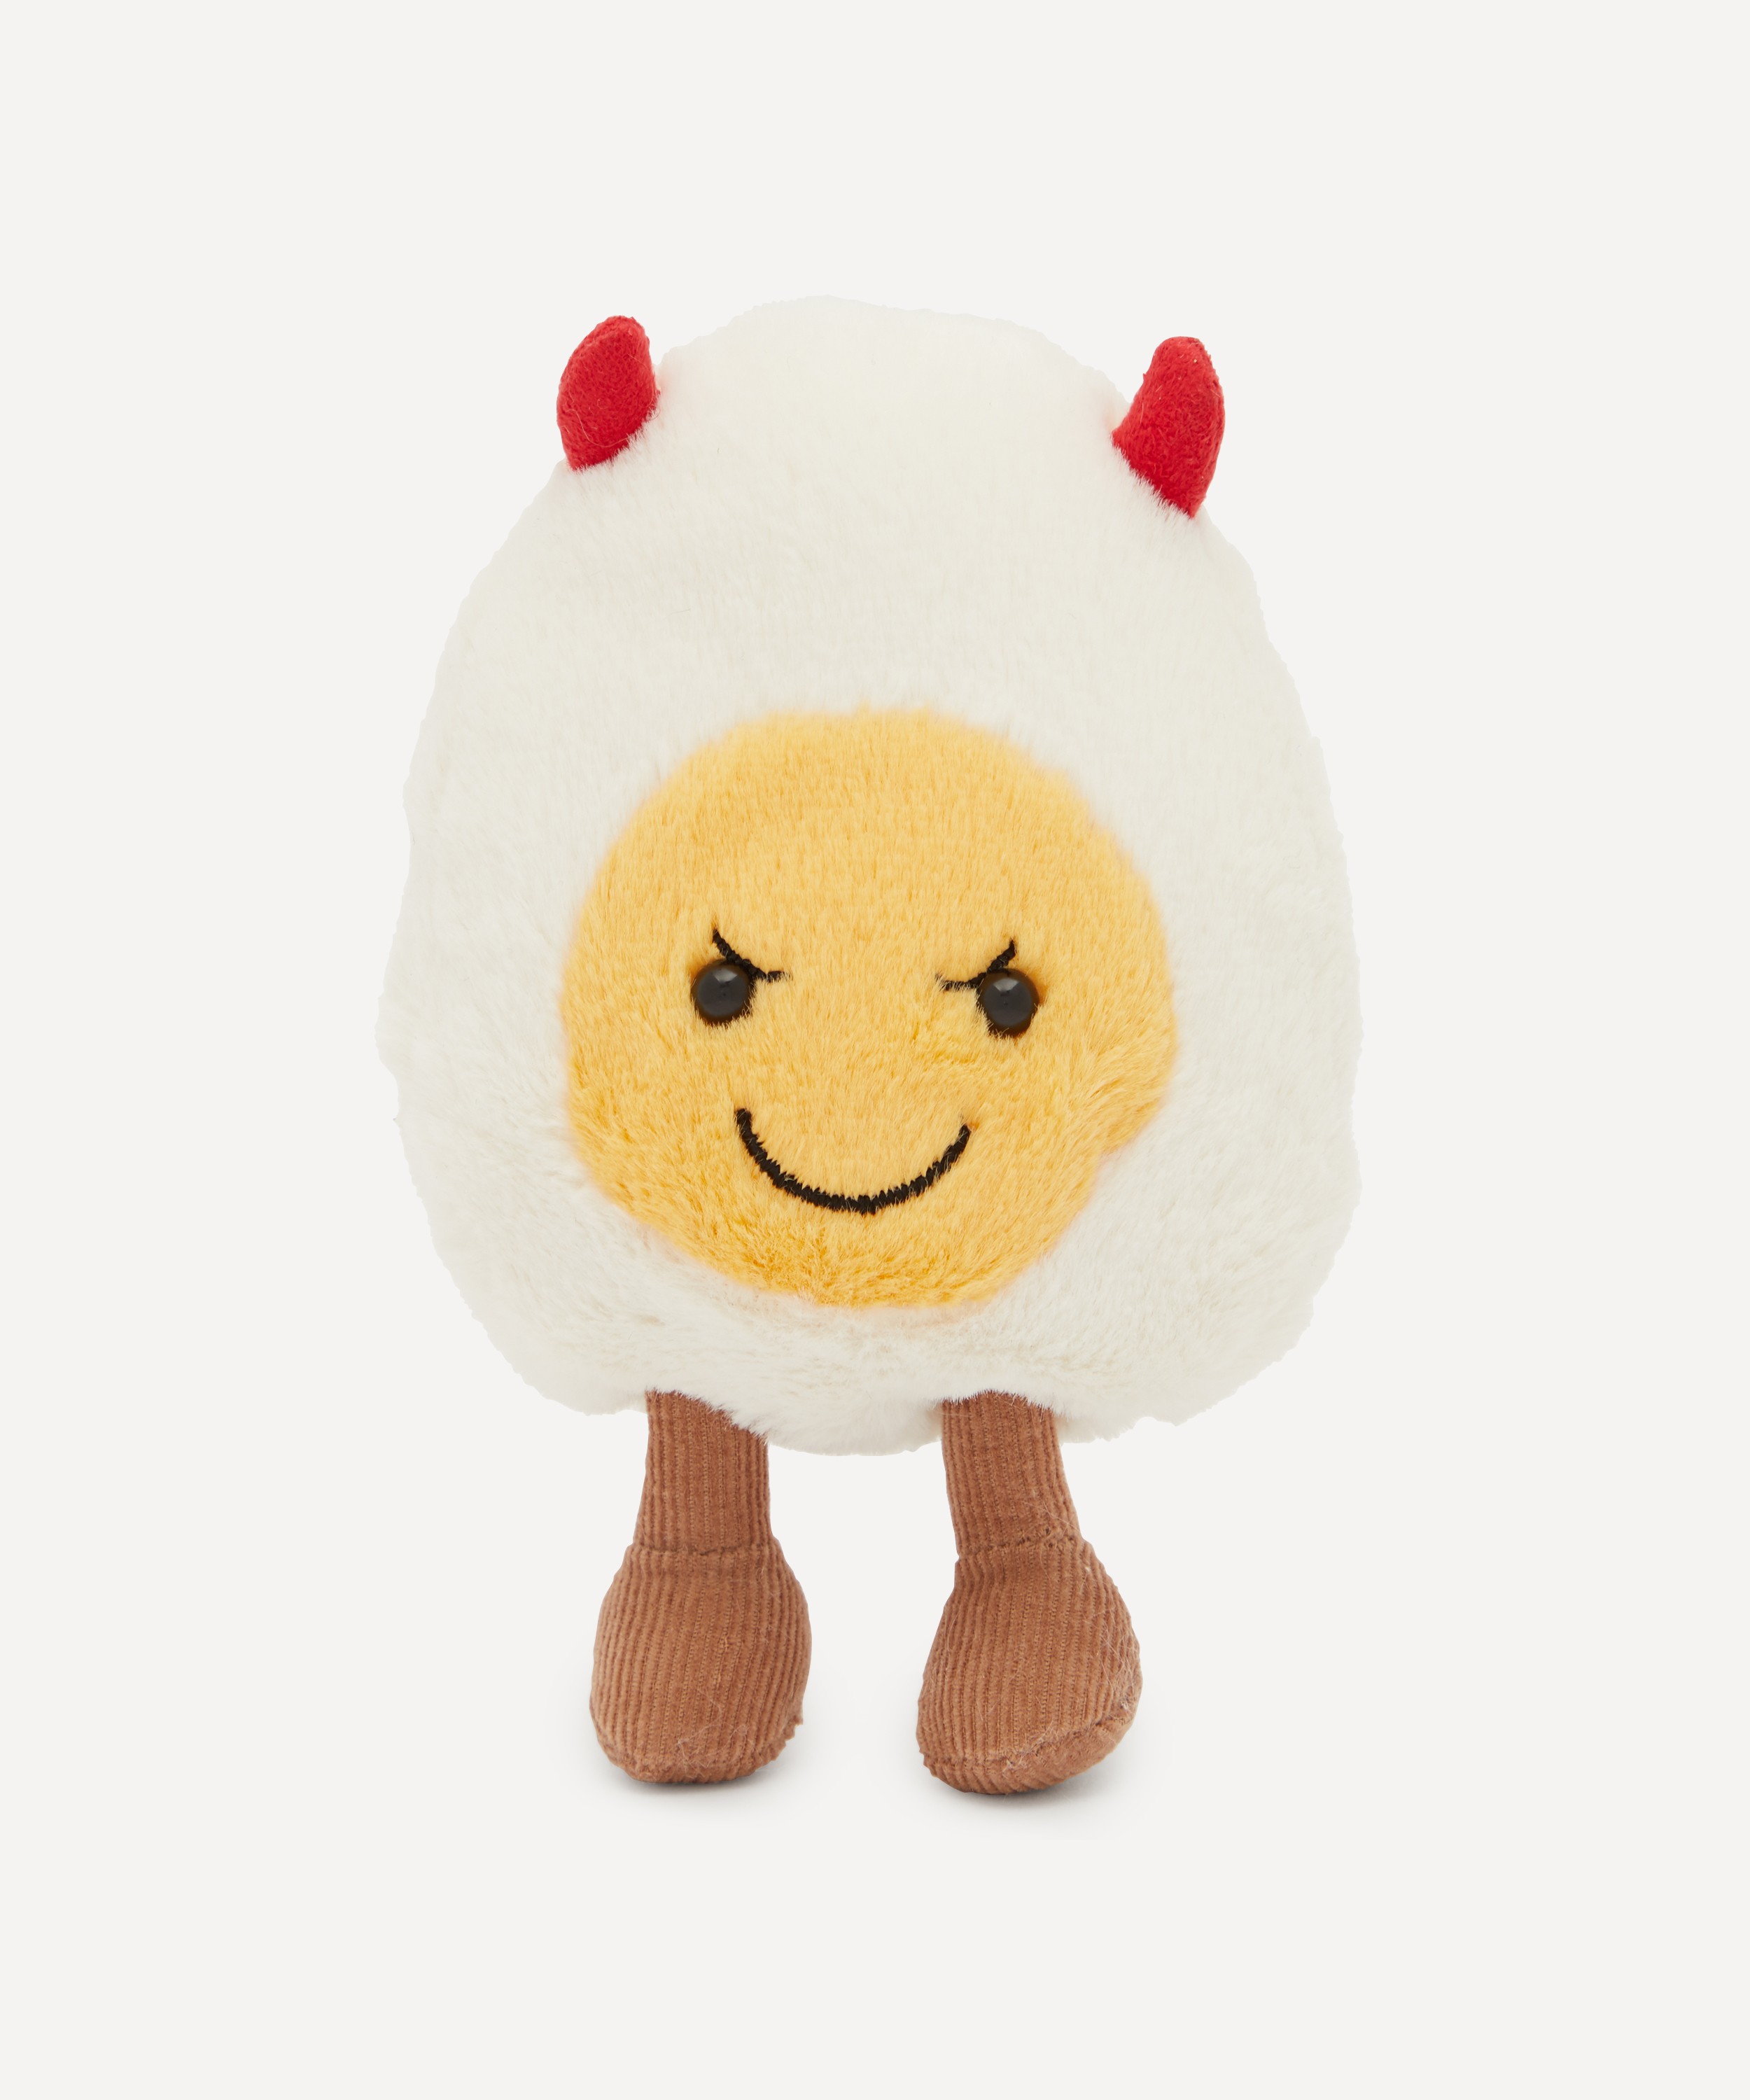 Jellycat, Bags, Jellycat Amuseable Happy Boiled Egg Bag